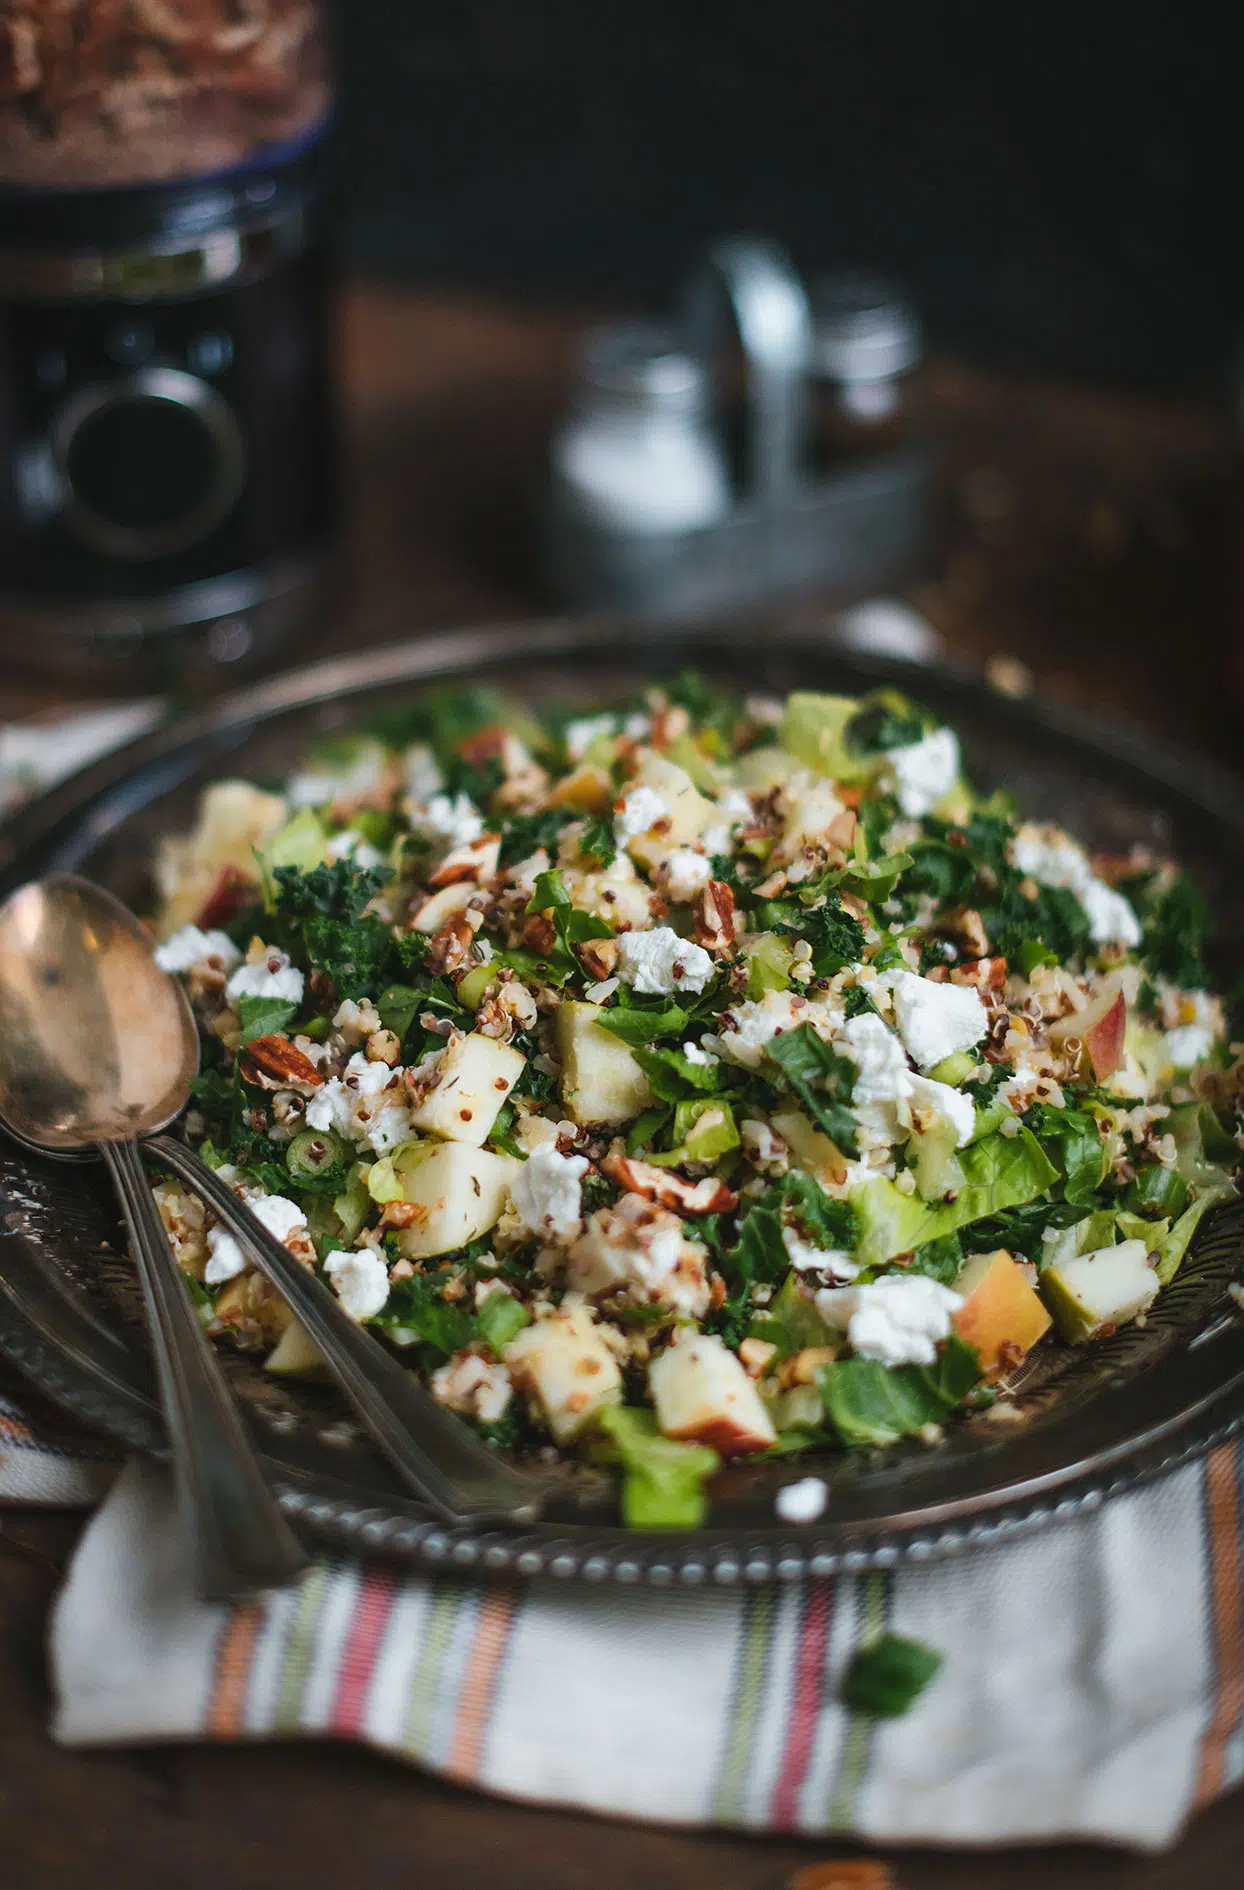 Kale salad with quinoa, apple and goat cheese